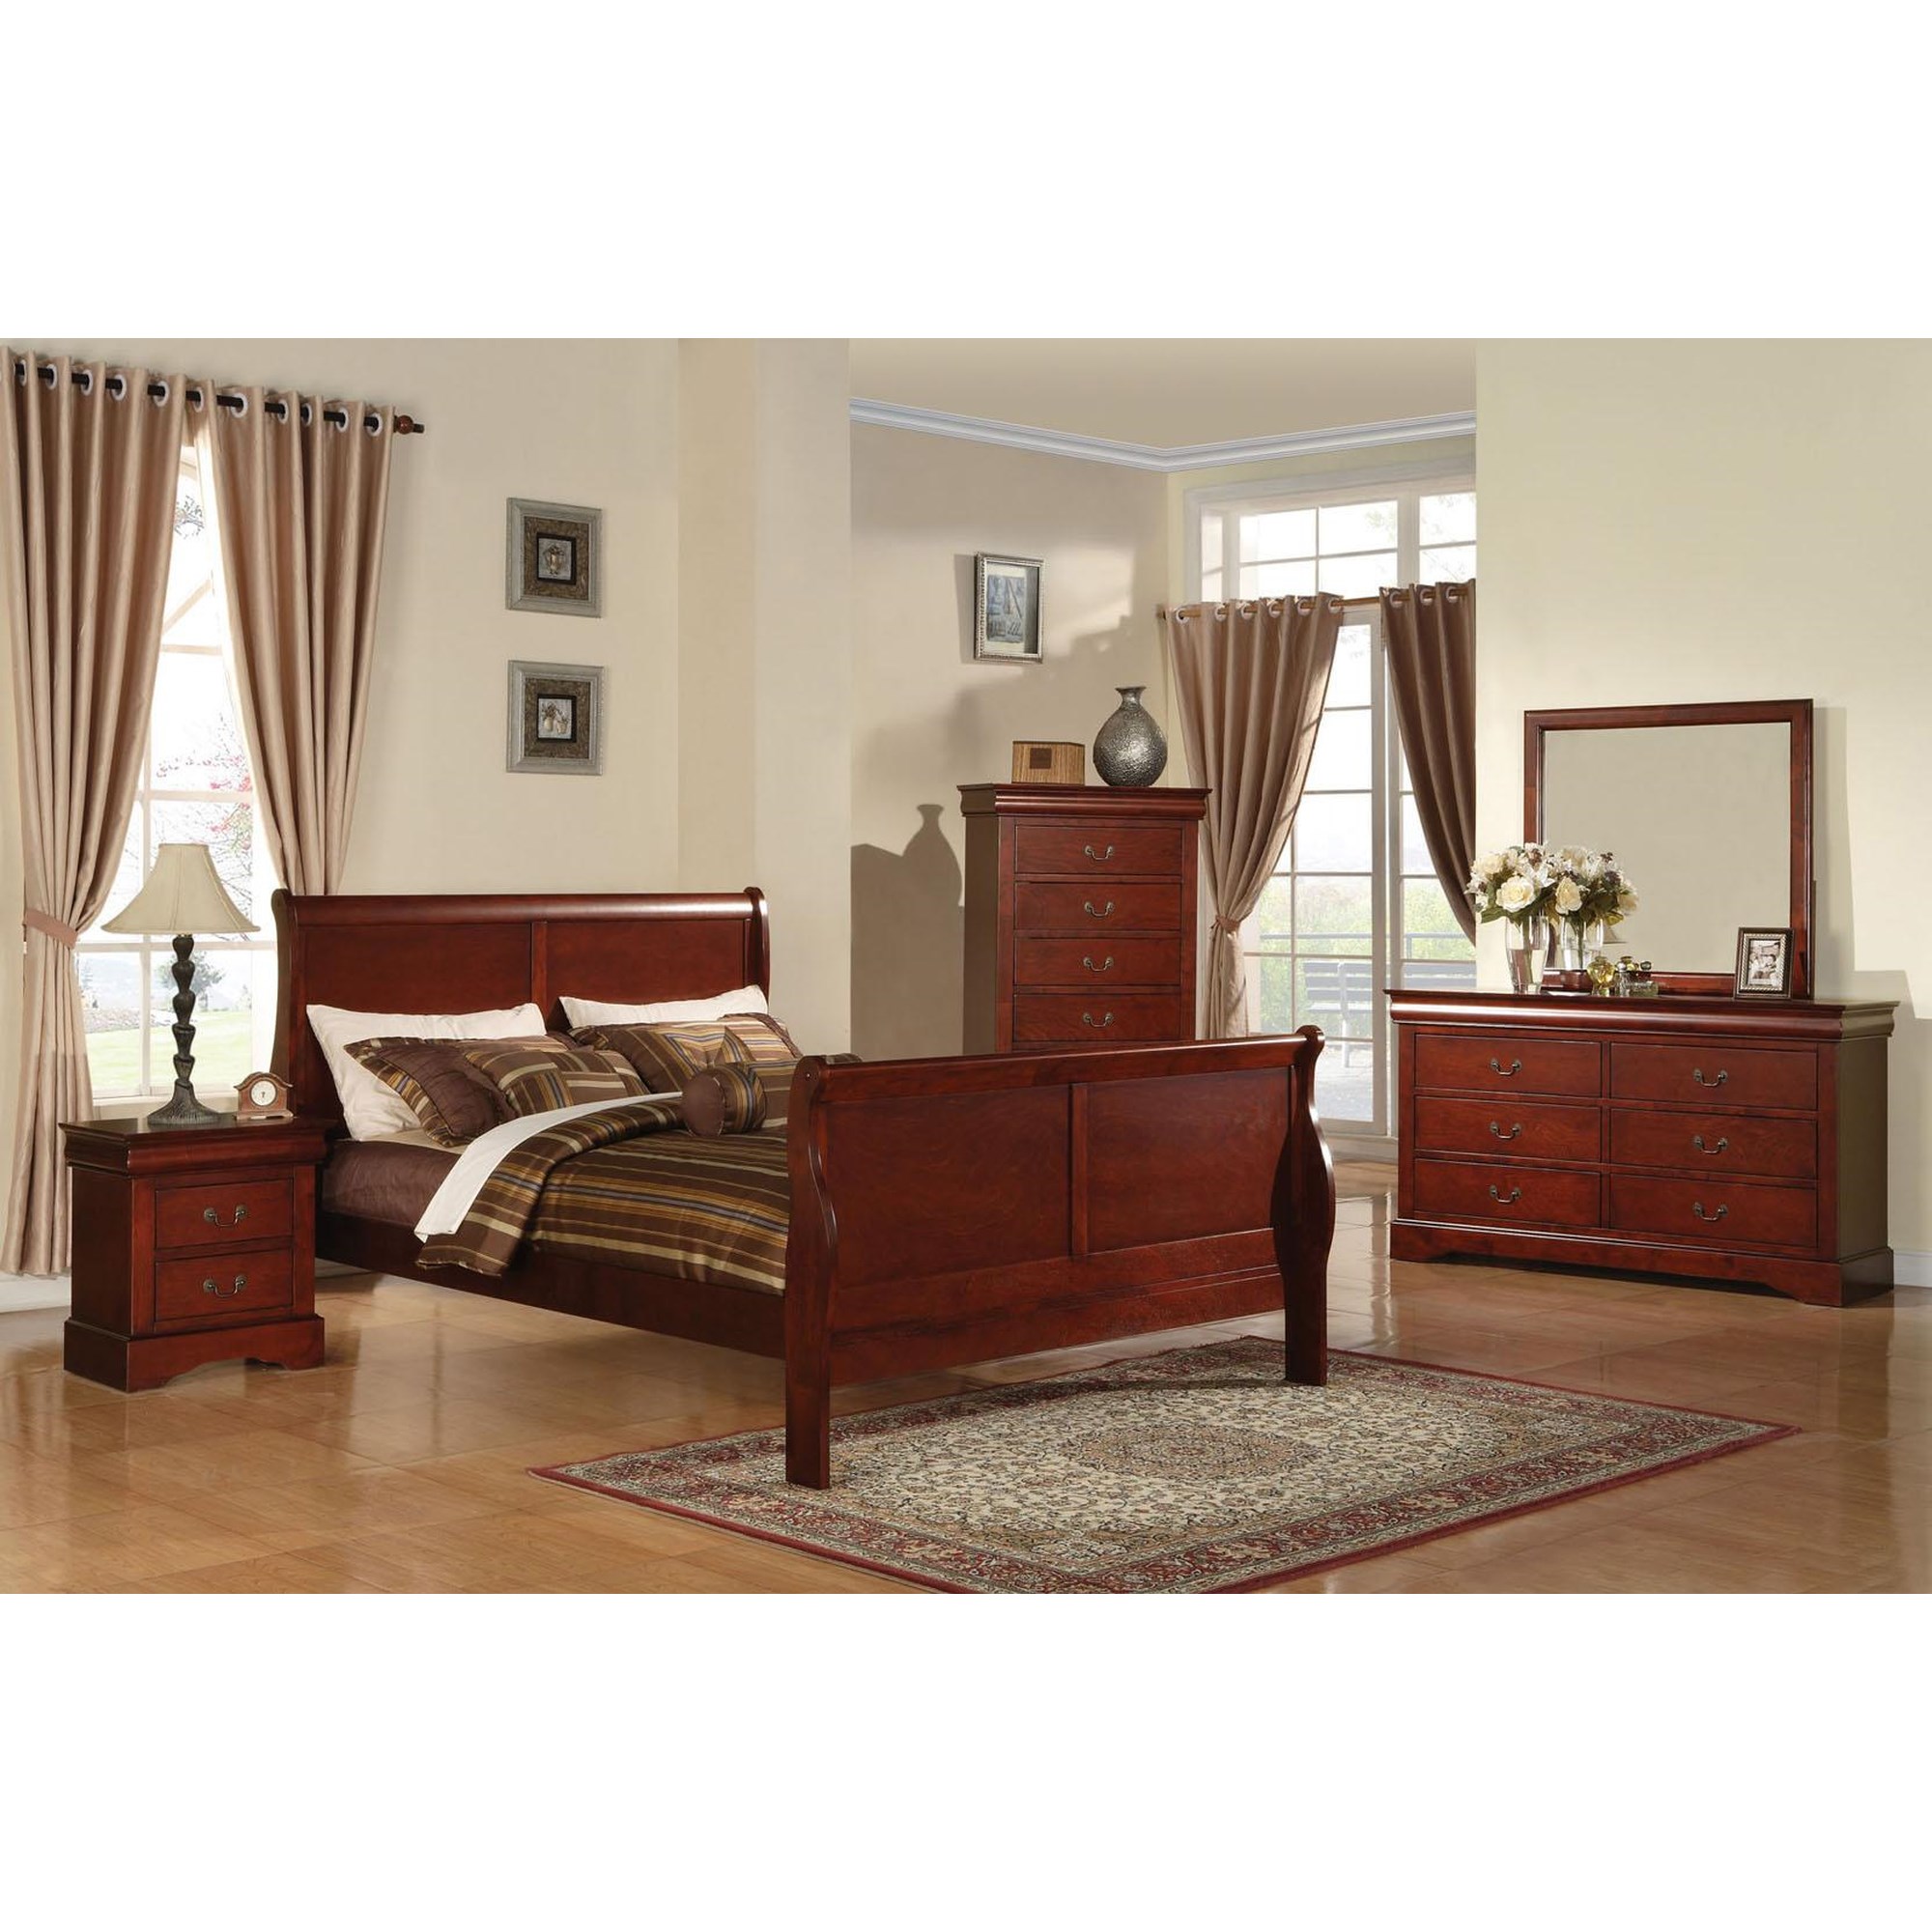 5Pc Queen/ King Sleigh Bedroom Set Louis Philippe Style in Black